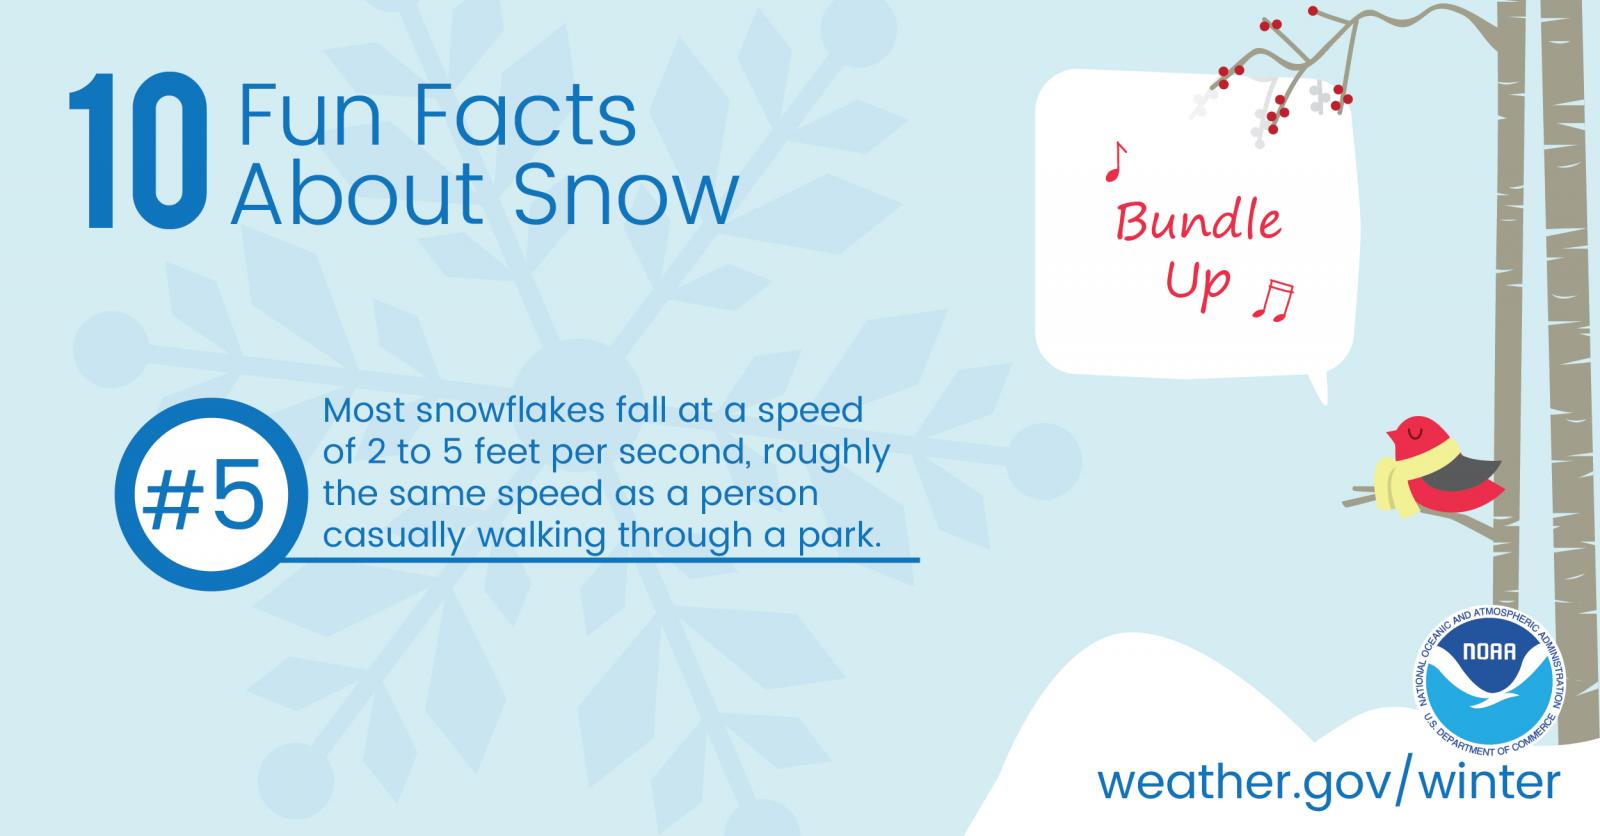 10 Fun Facts About Snow: #5. Most snowflakes fall at a speed of 2 to 5 feet per second, roughly the same speed as a person casually walking through a park.